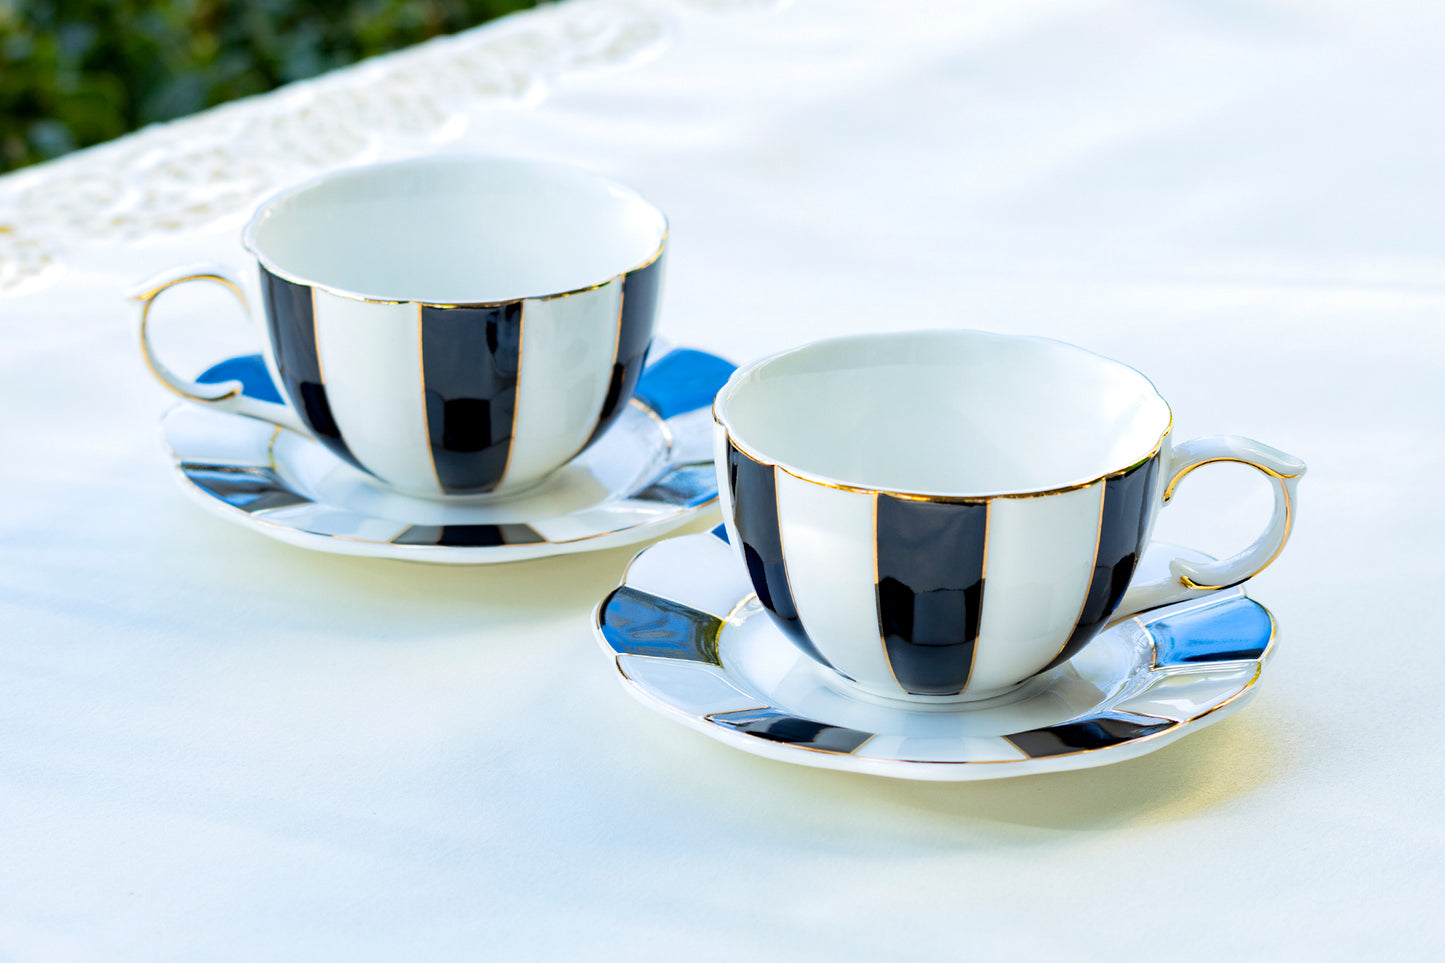 Grace Teaware Black and White Scallop Fine Porcelain Tea Cup and Saucer set of 2